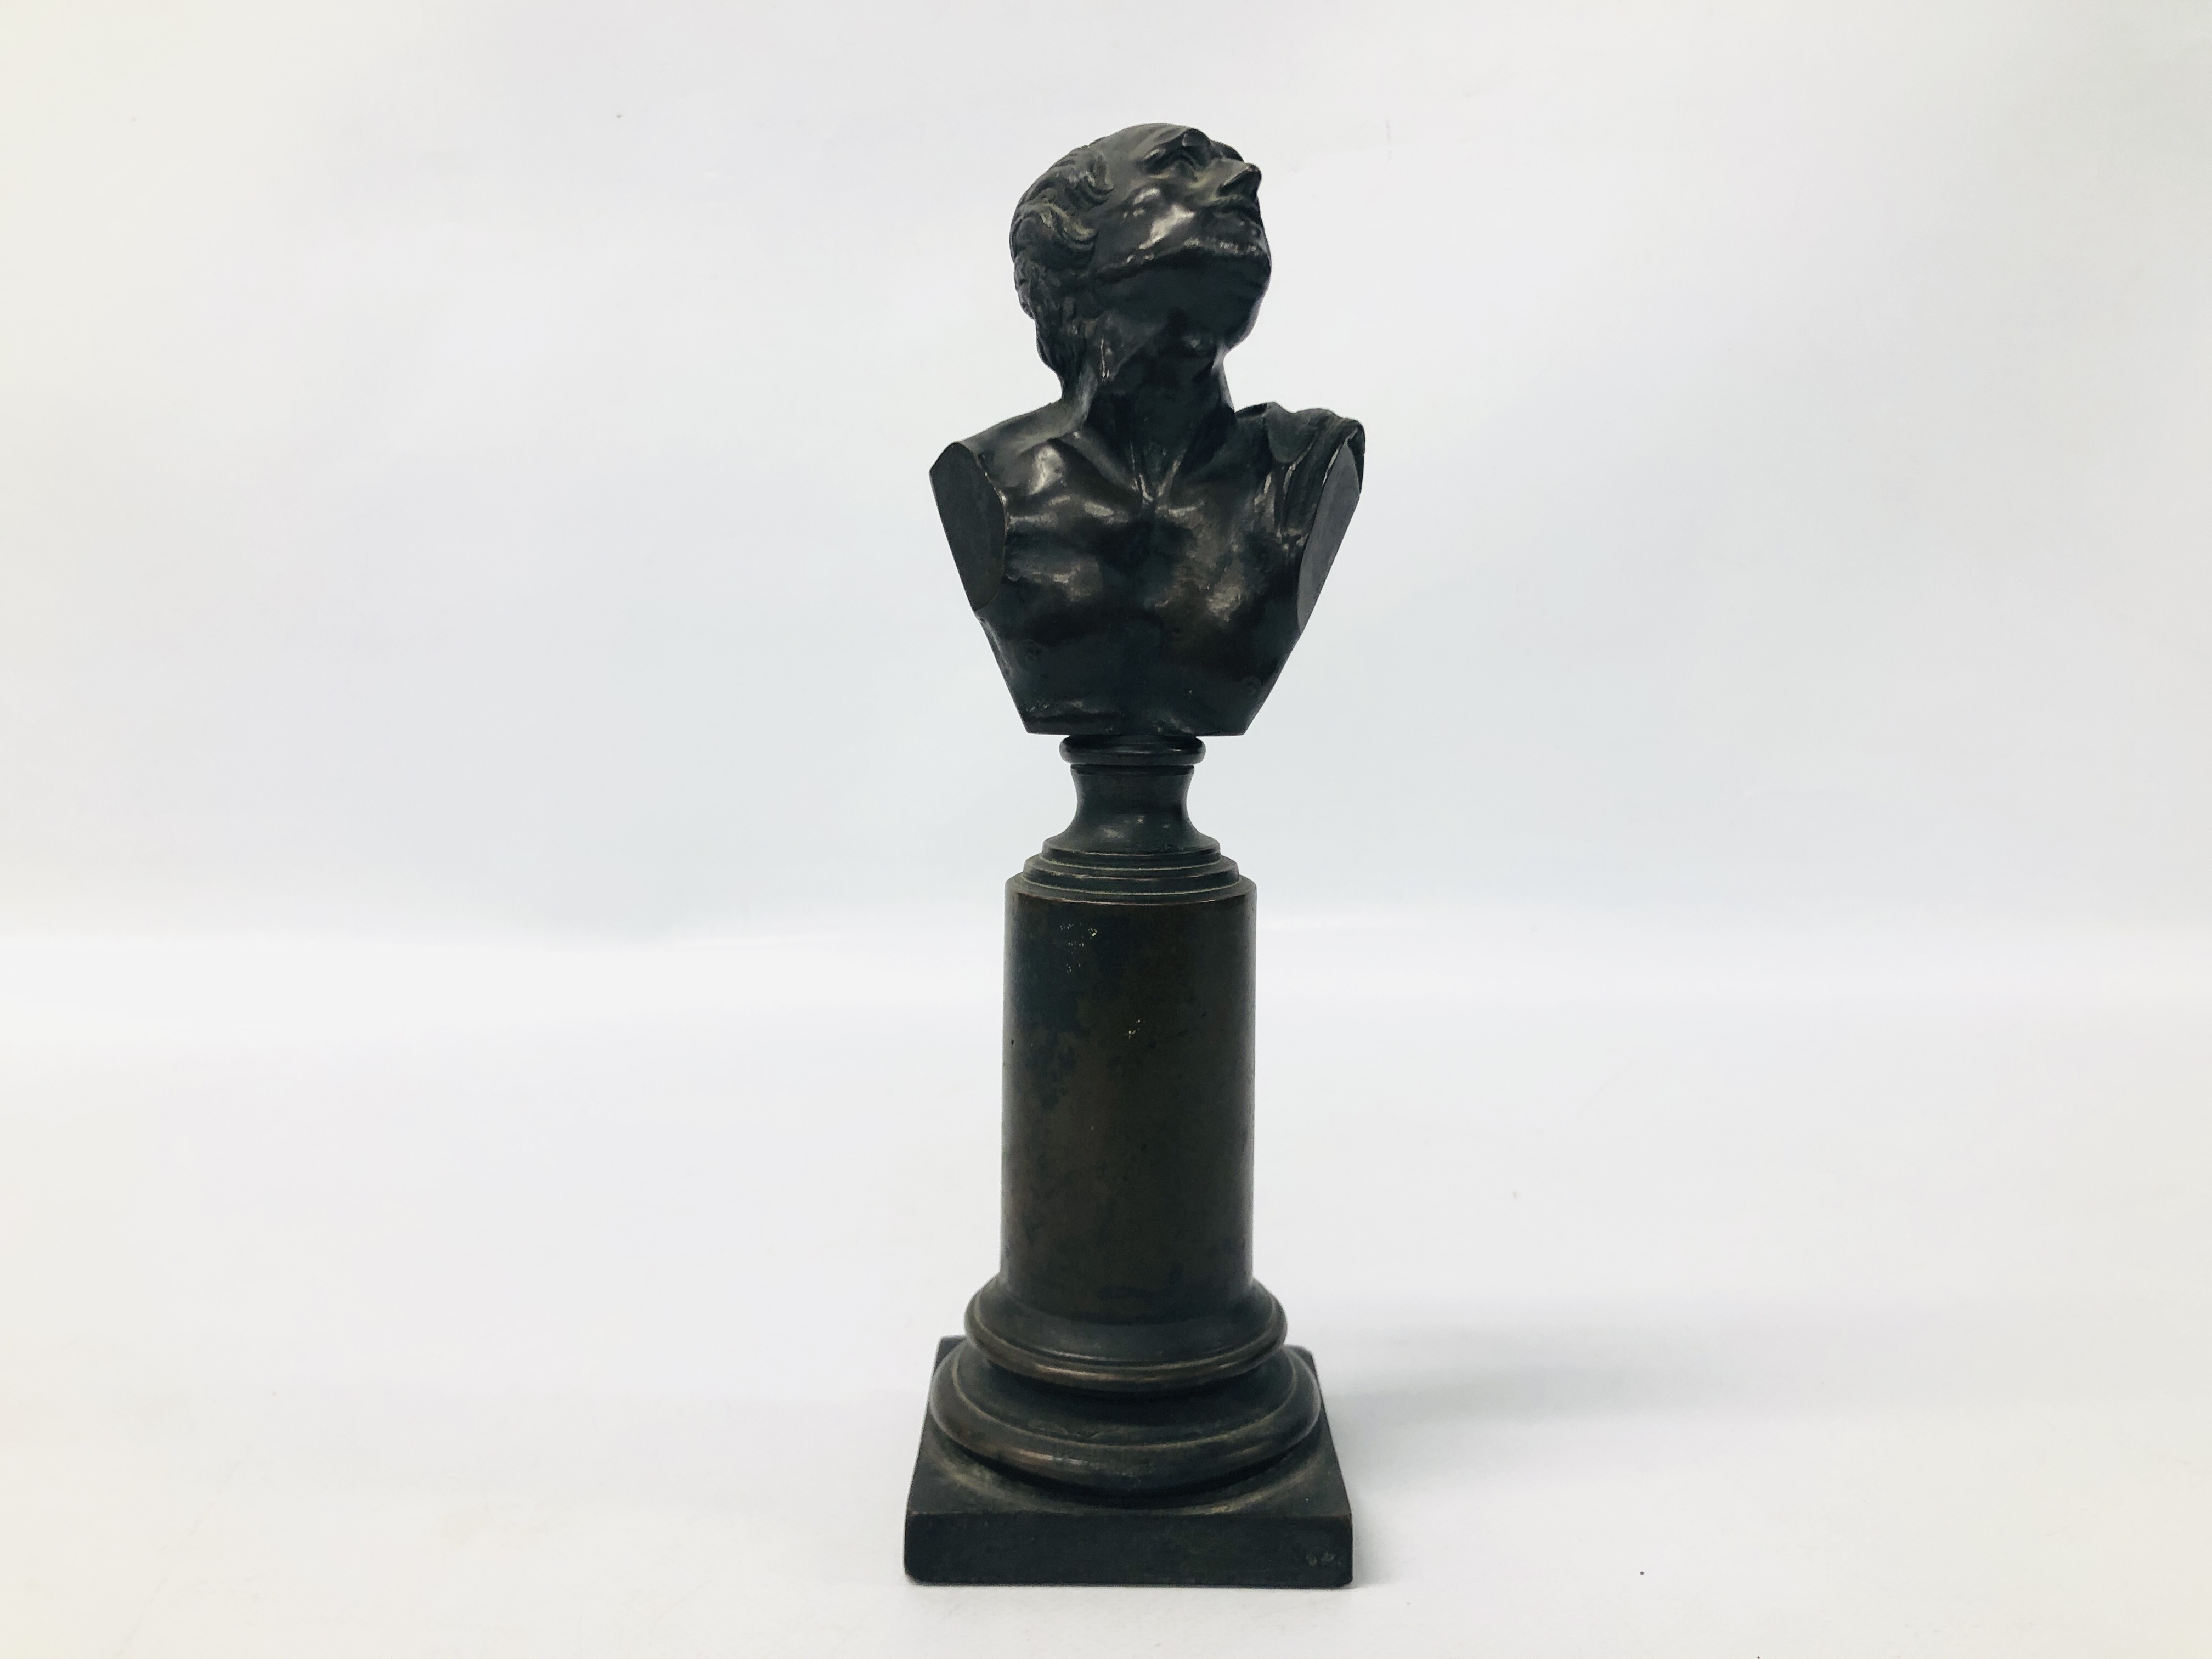 A BRONZE BUST OF A GENTLEMAN MOUNTED ON A COLUMN WITH SQUARE BASE, H 25CM.